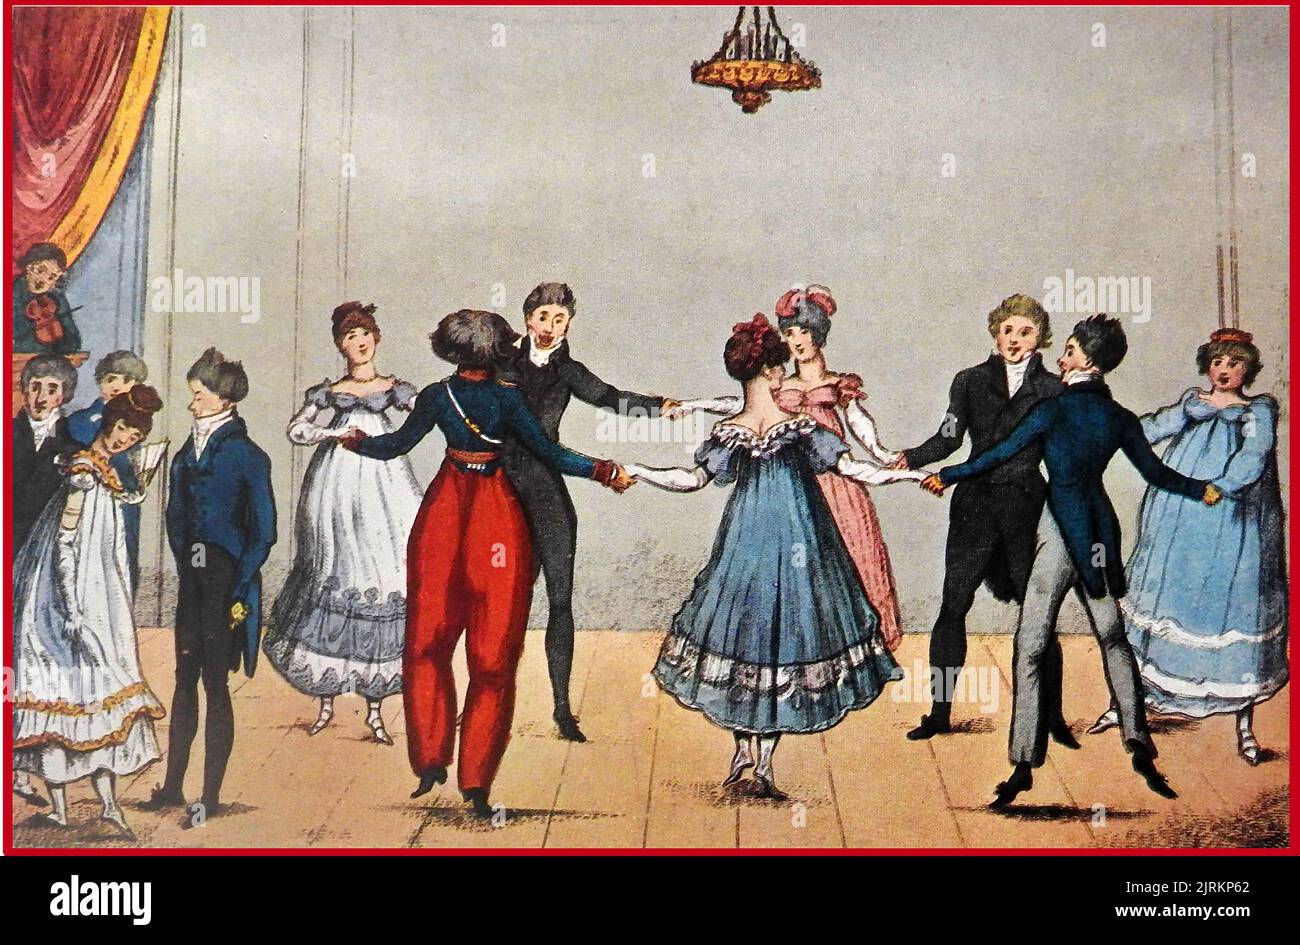 A coloured early 19th century copper engraving of a group dancing a quadrille. .The term quadrille originated in 17th-century military parades where four mounted horsemen formed square formations.  As a dance it became popular in the 18th and 19th centuries both in Europe and the European colonies. It became a craze in Britain after  Lady Jersey (Sarah Sophia Child Villiers, Countess of Jersey   1785 – 1867) introduced the dance to high society gatherings.(She was  born Lady Sarah Fane) Stock Photo